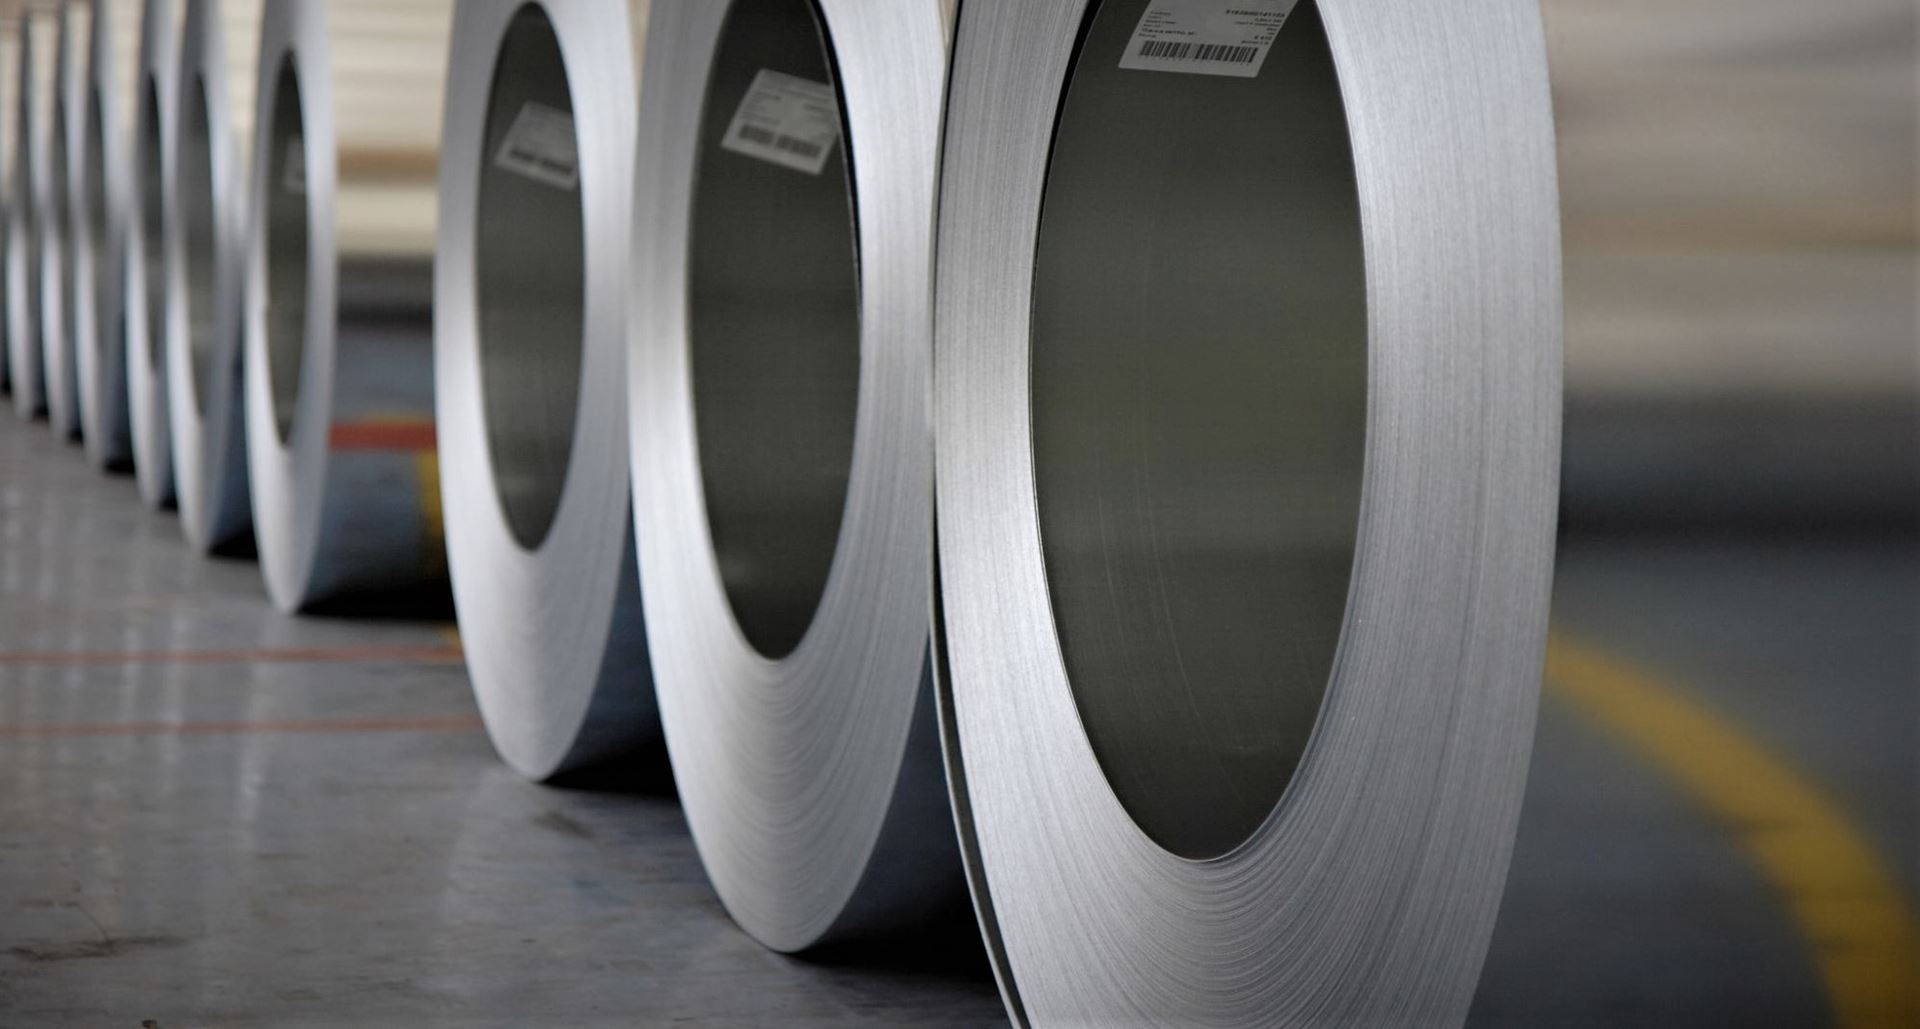 Imports of stainless steel to Russia increased in April